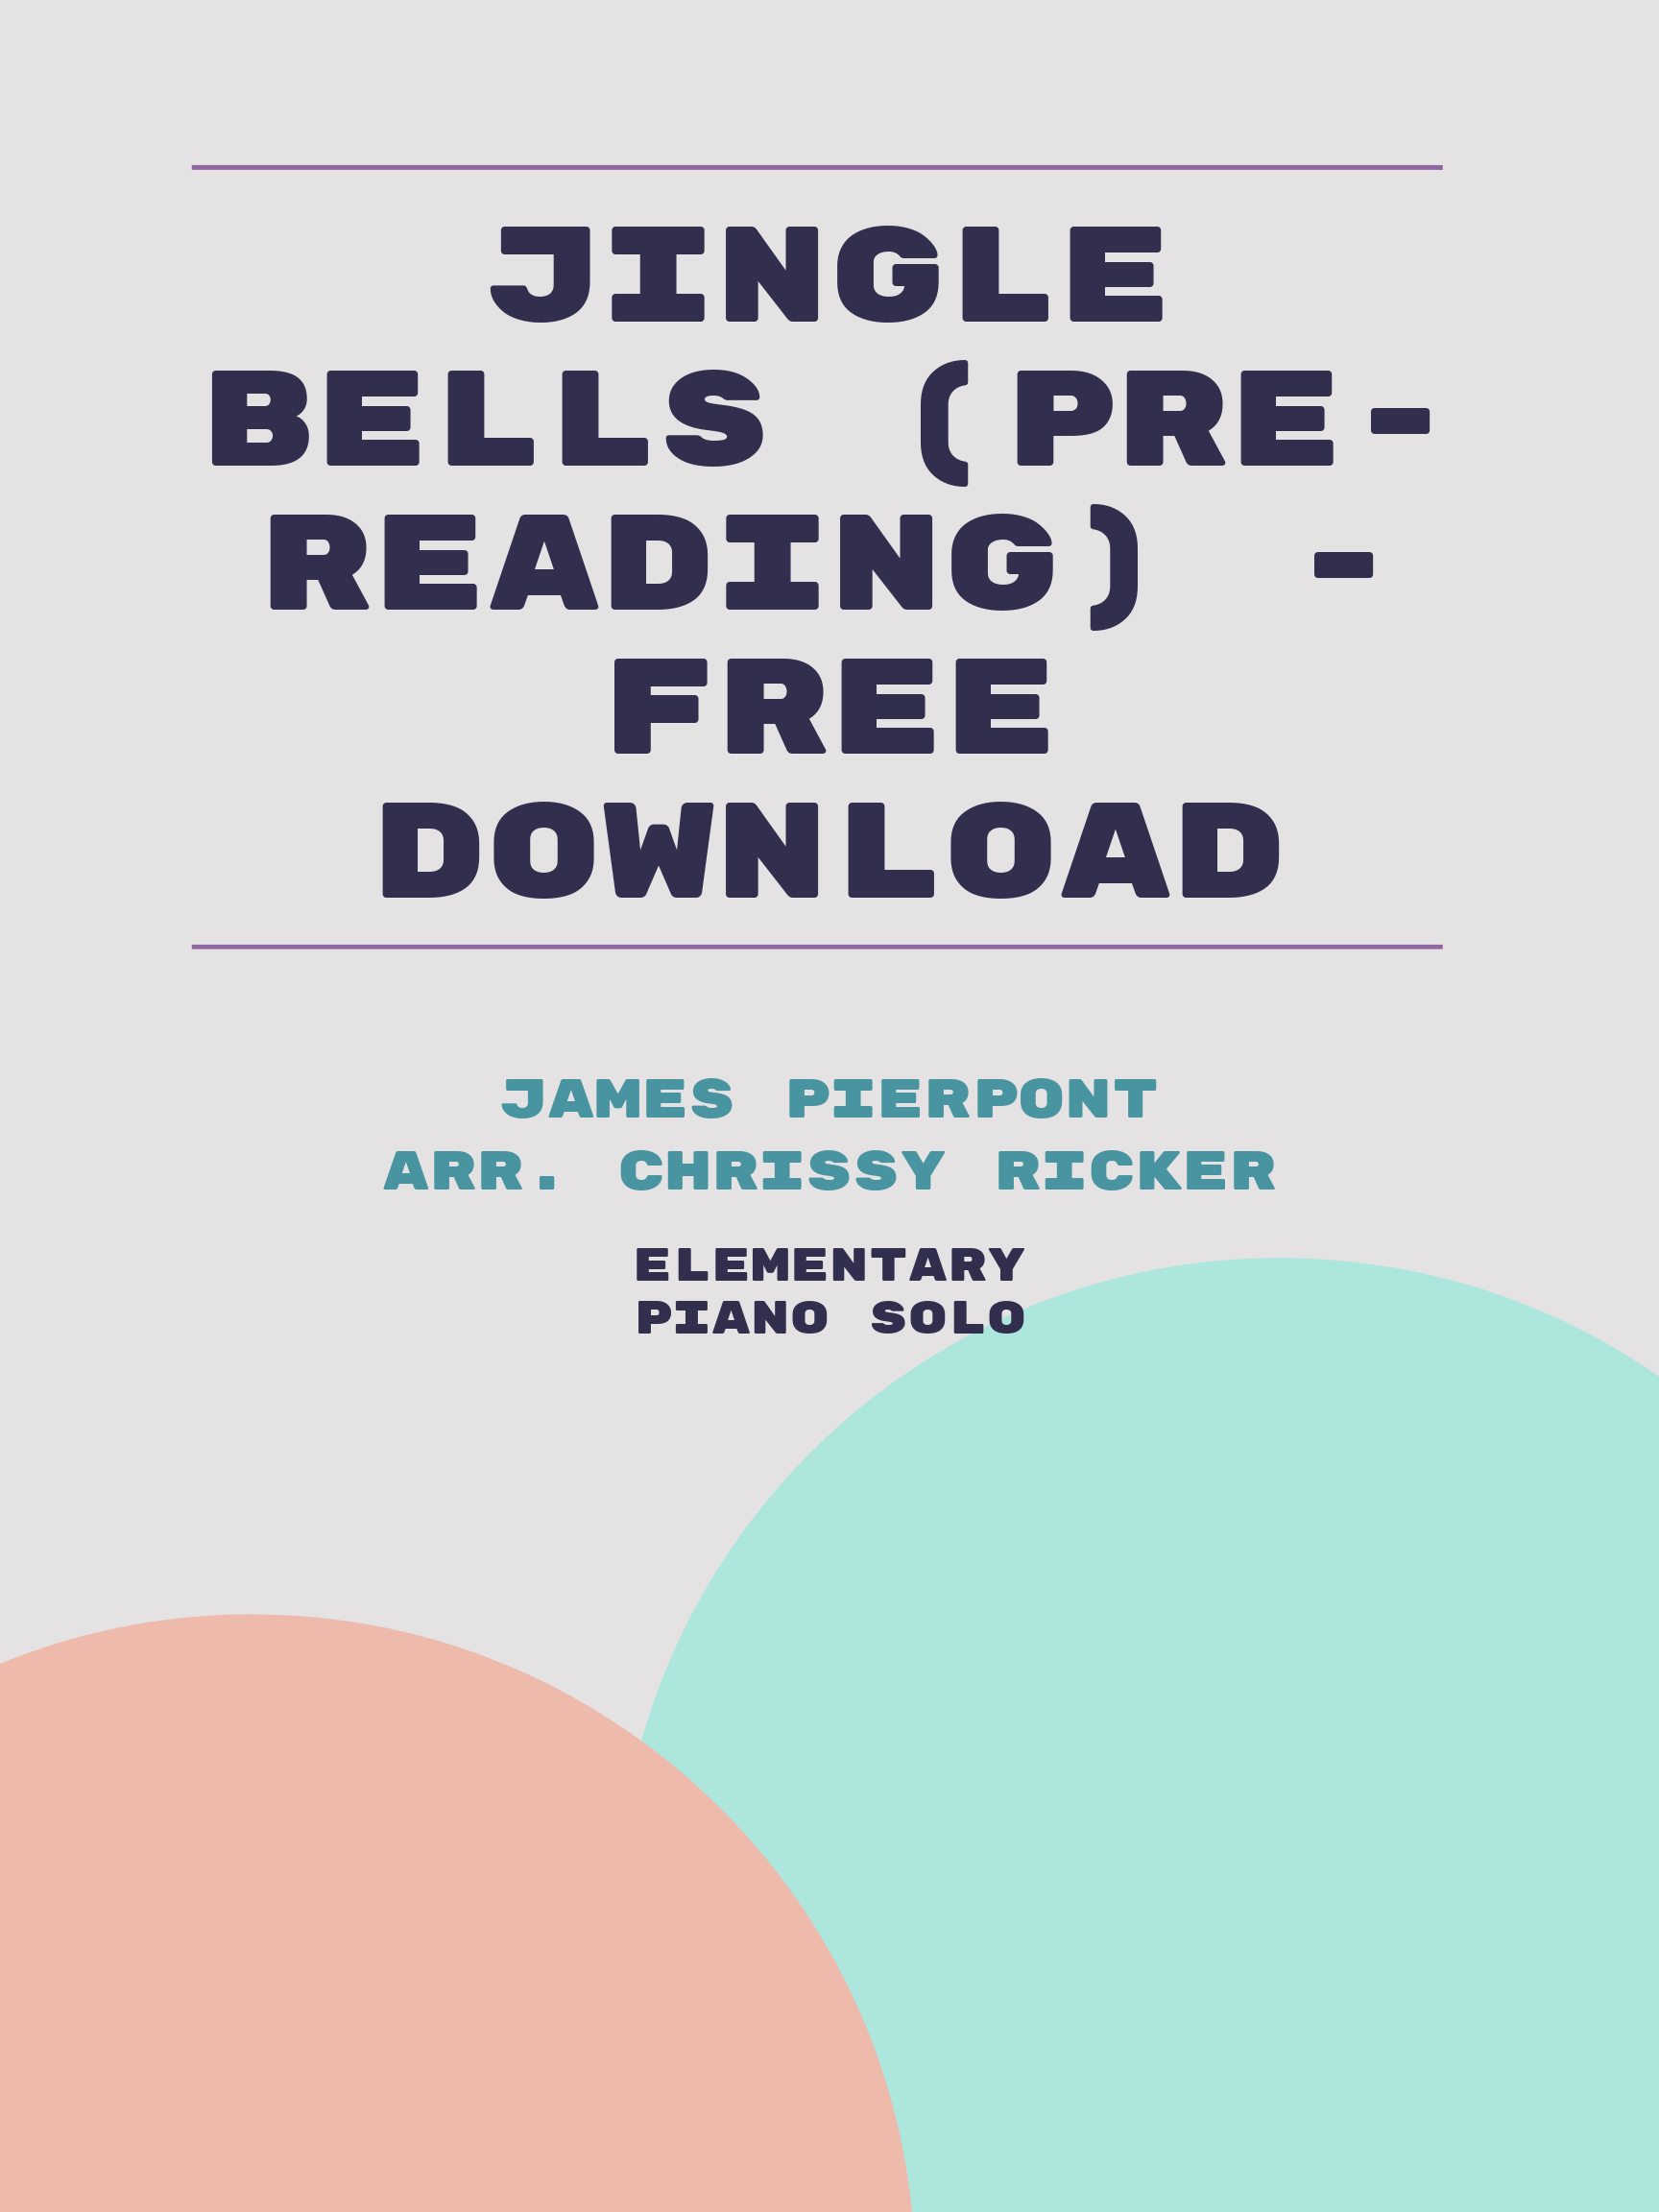 Jingle Bells (pre-reading) - free download Sample Page